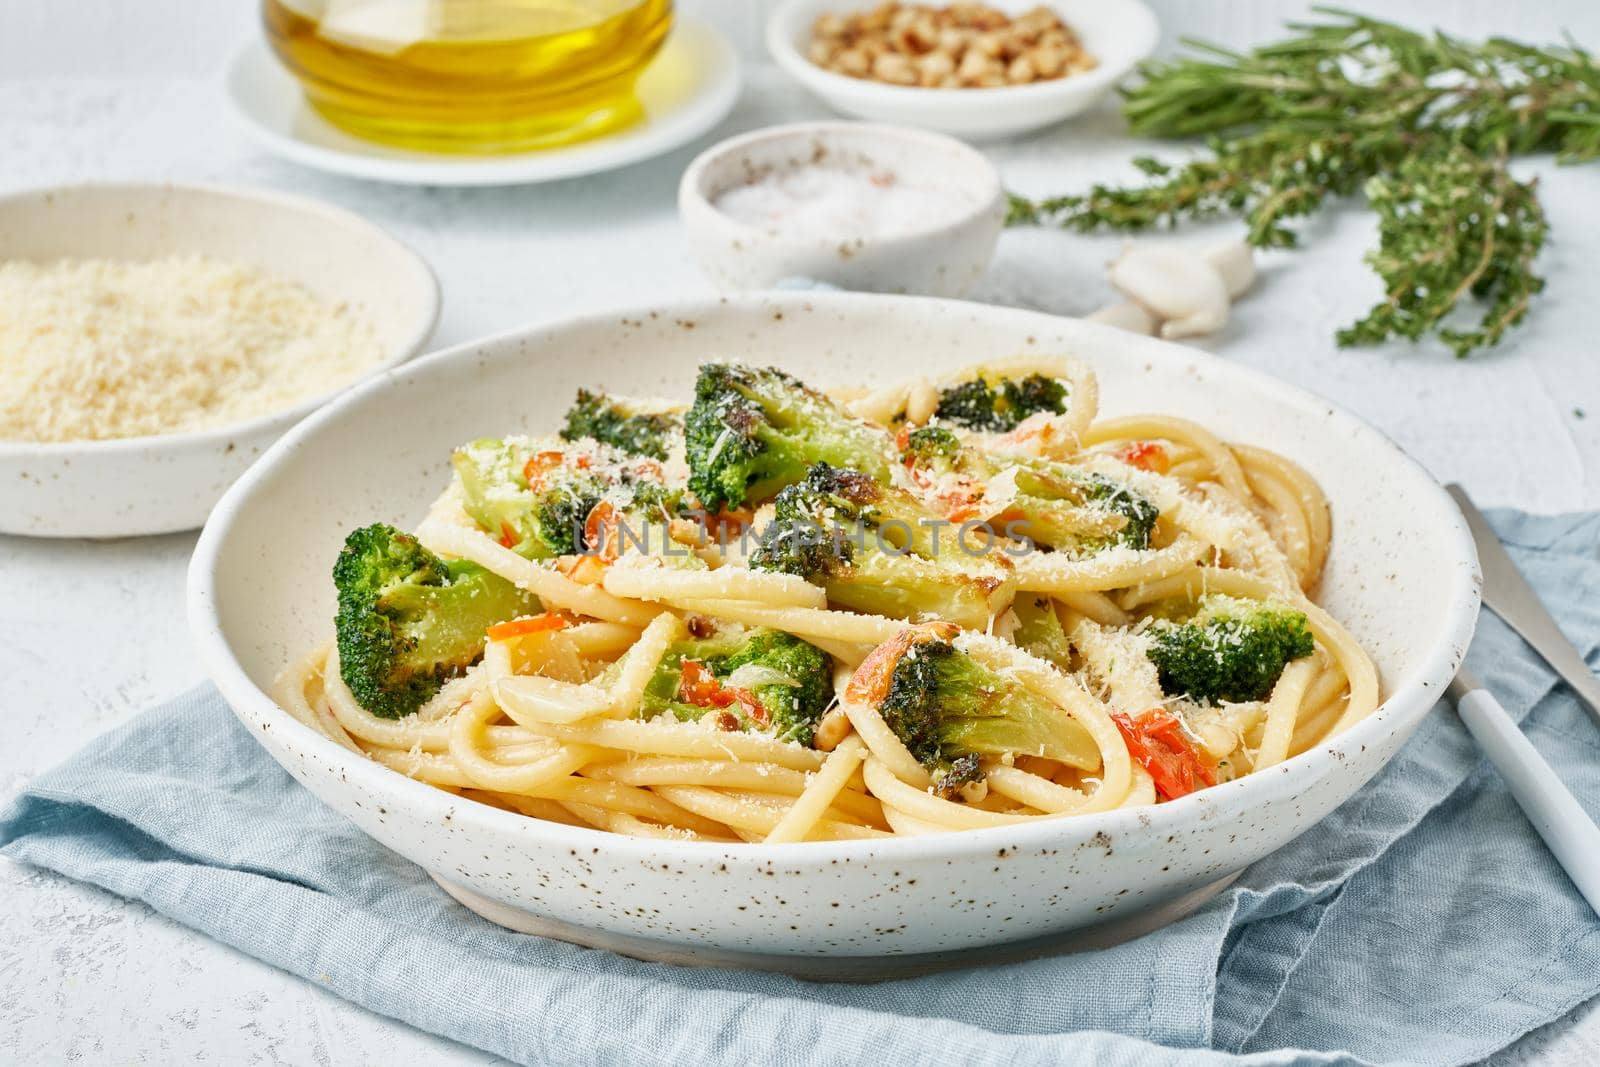 Spaghetti pasta with broccoli, bucatini with peppers, garlic, pine nuts. Food for vegans, vegetarians. Healthy dietary Mediterranean food. Light white table. Side view